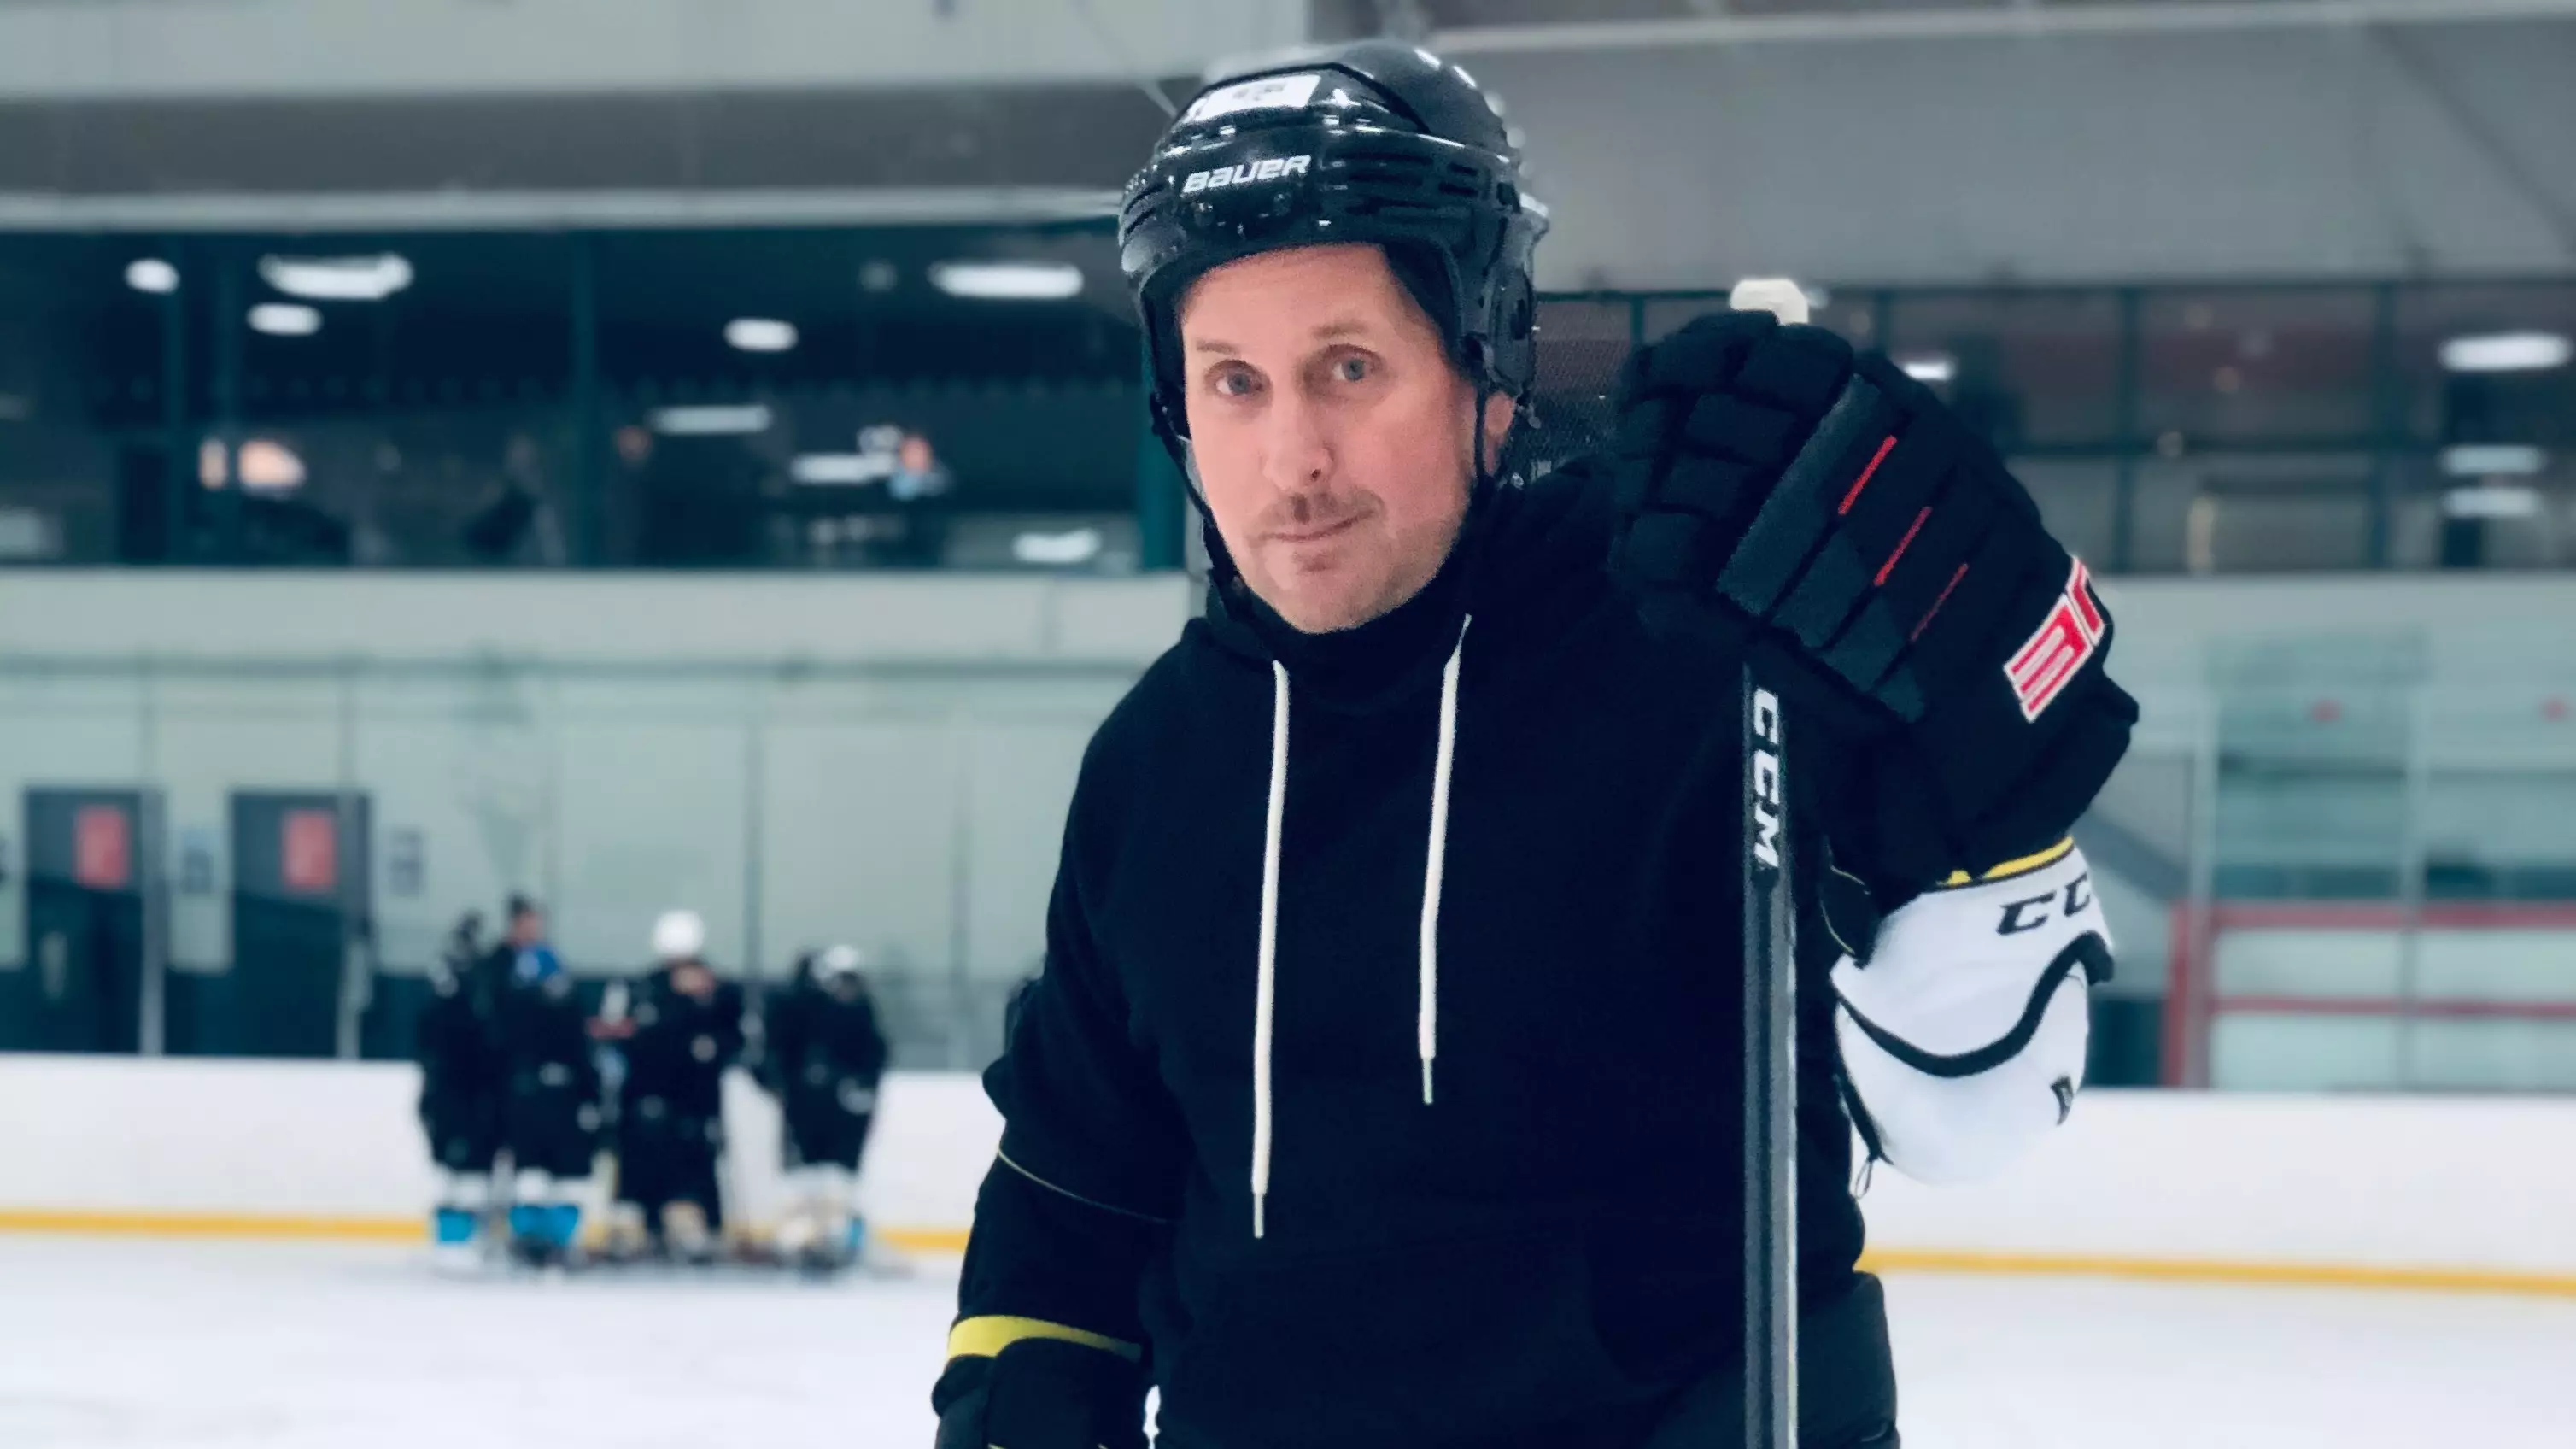 Emilio Estevez Is Officially Coming Back For The Mighty Ducks Reboot